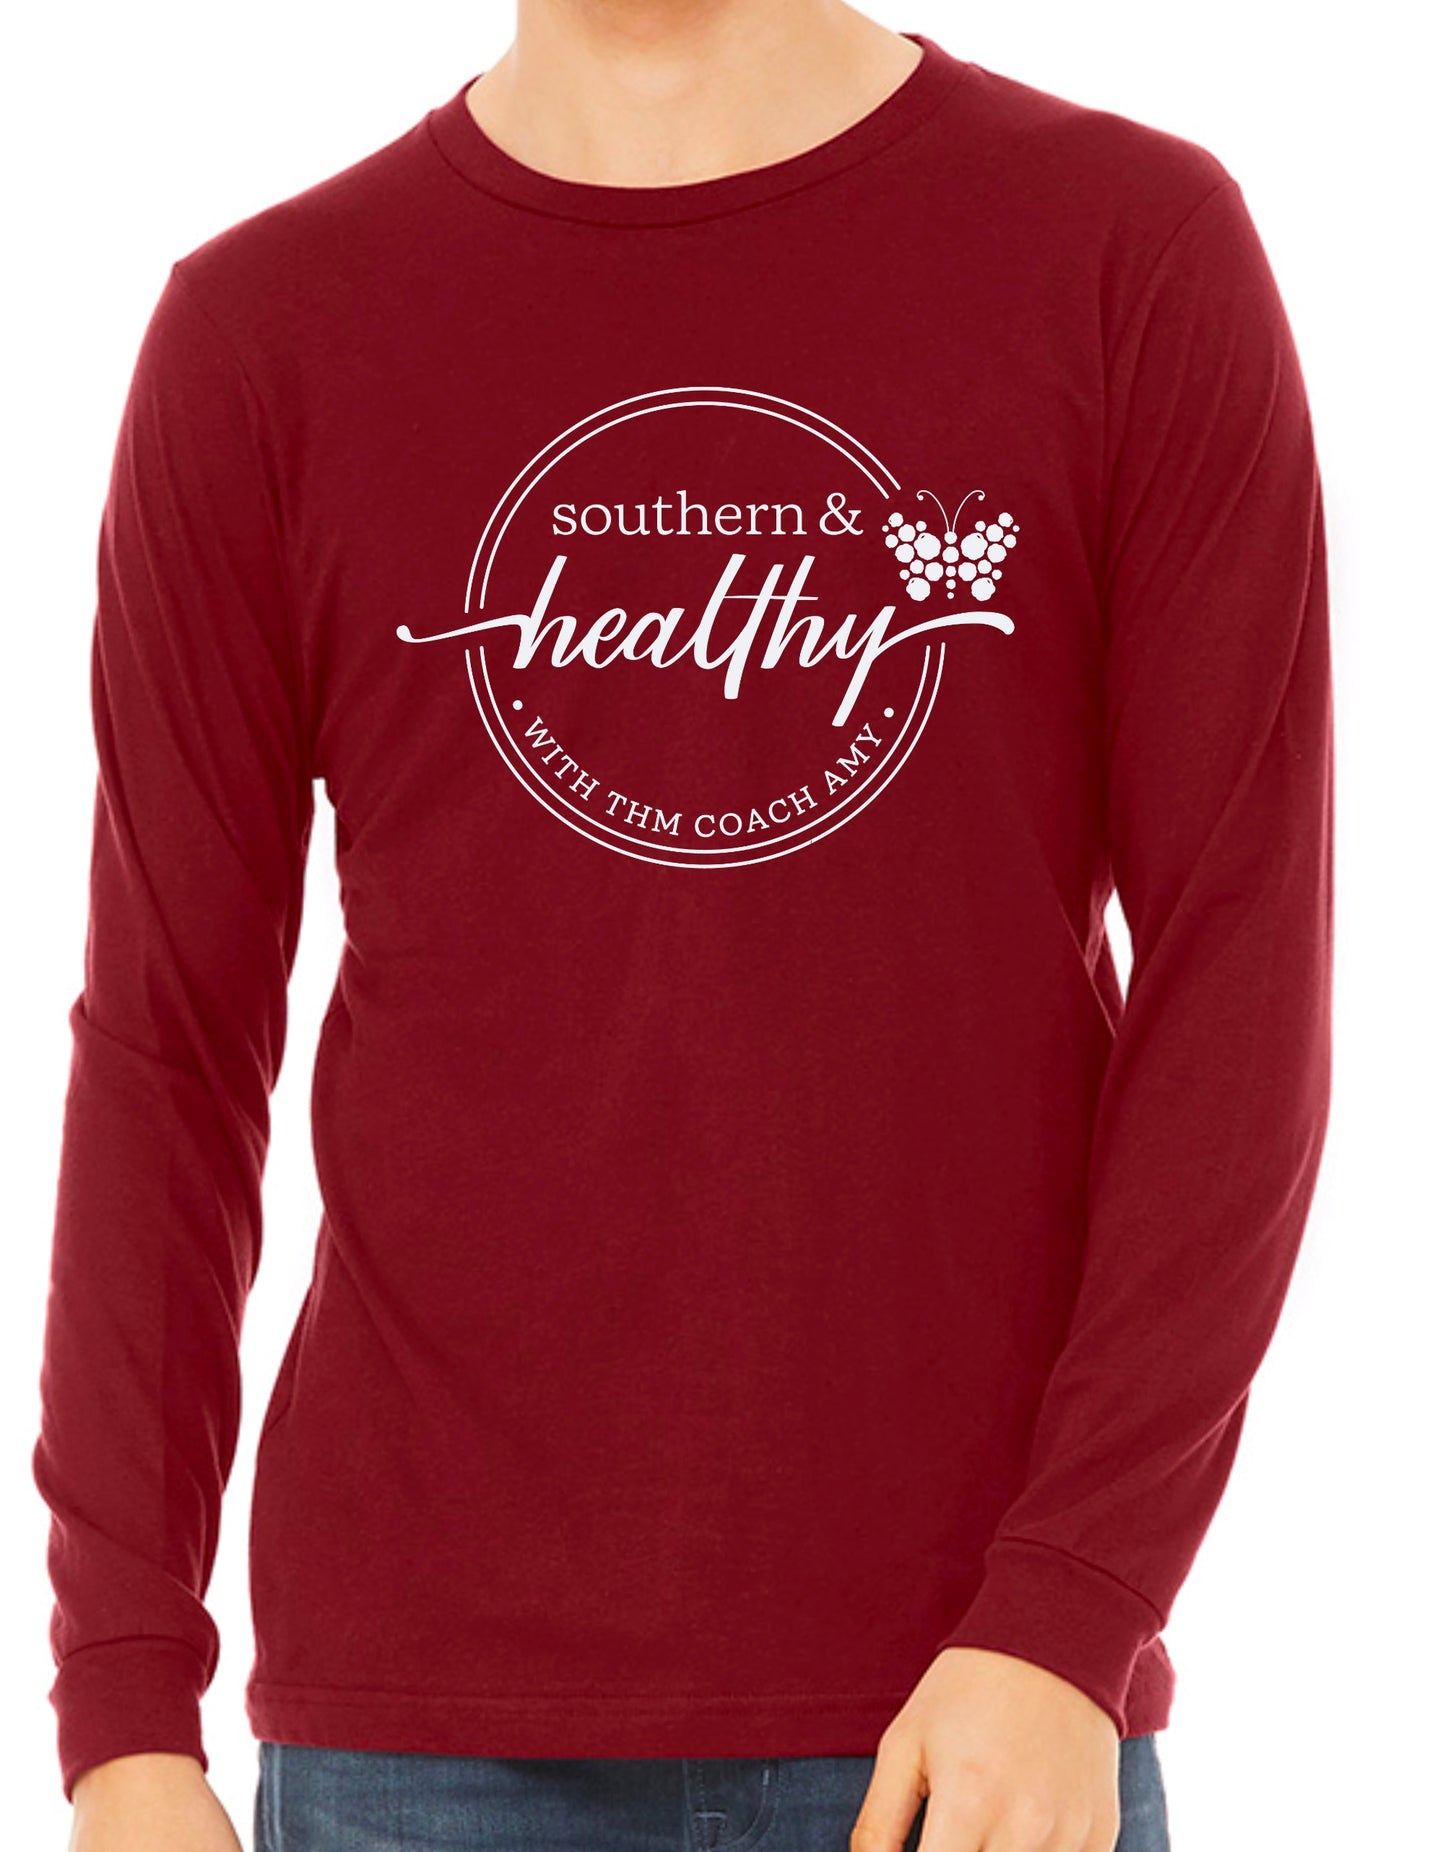 Southern & Healthy Long sleeve